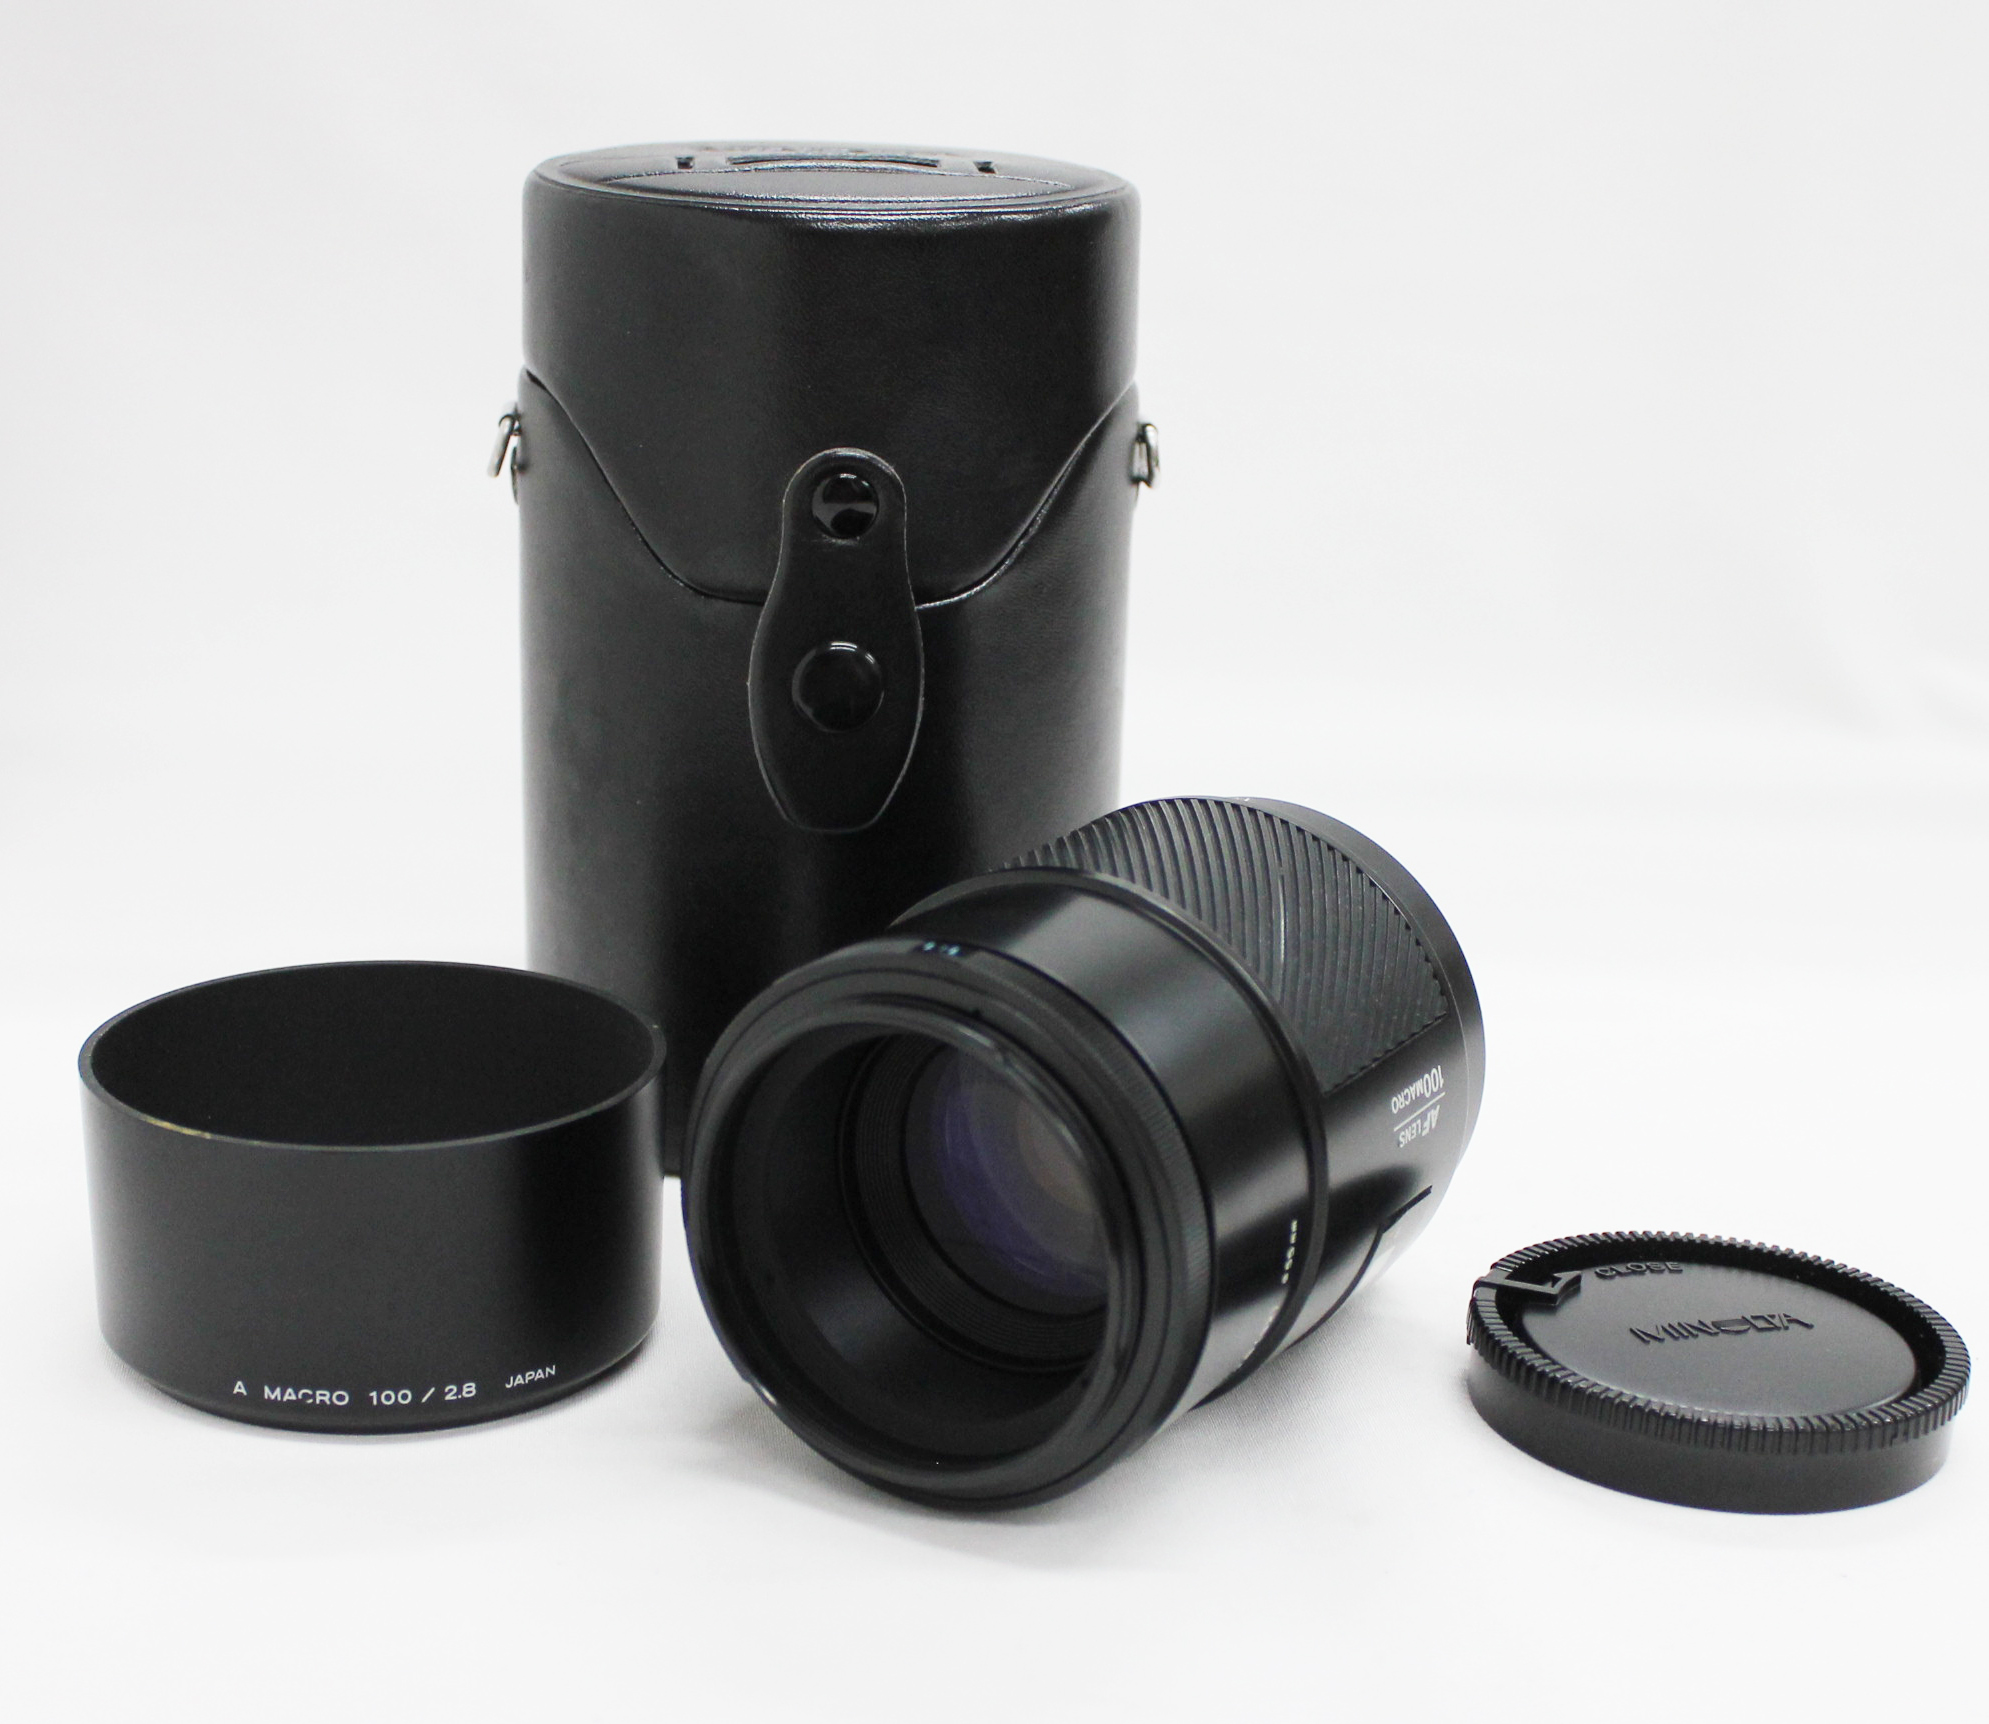 Japan Used Camera Shop | [Near Mint] Minolta AF Macro 100mm F/2.8 Lens for Sony A Mount with Case from Japan